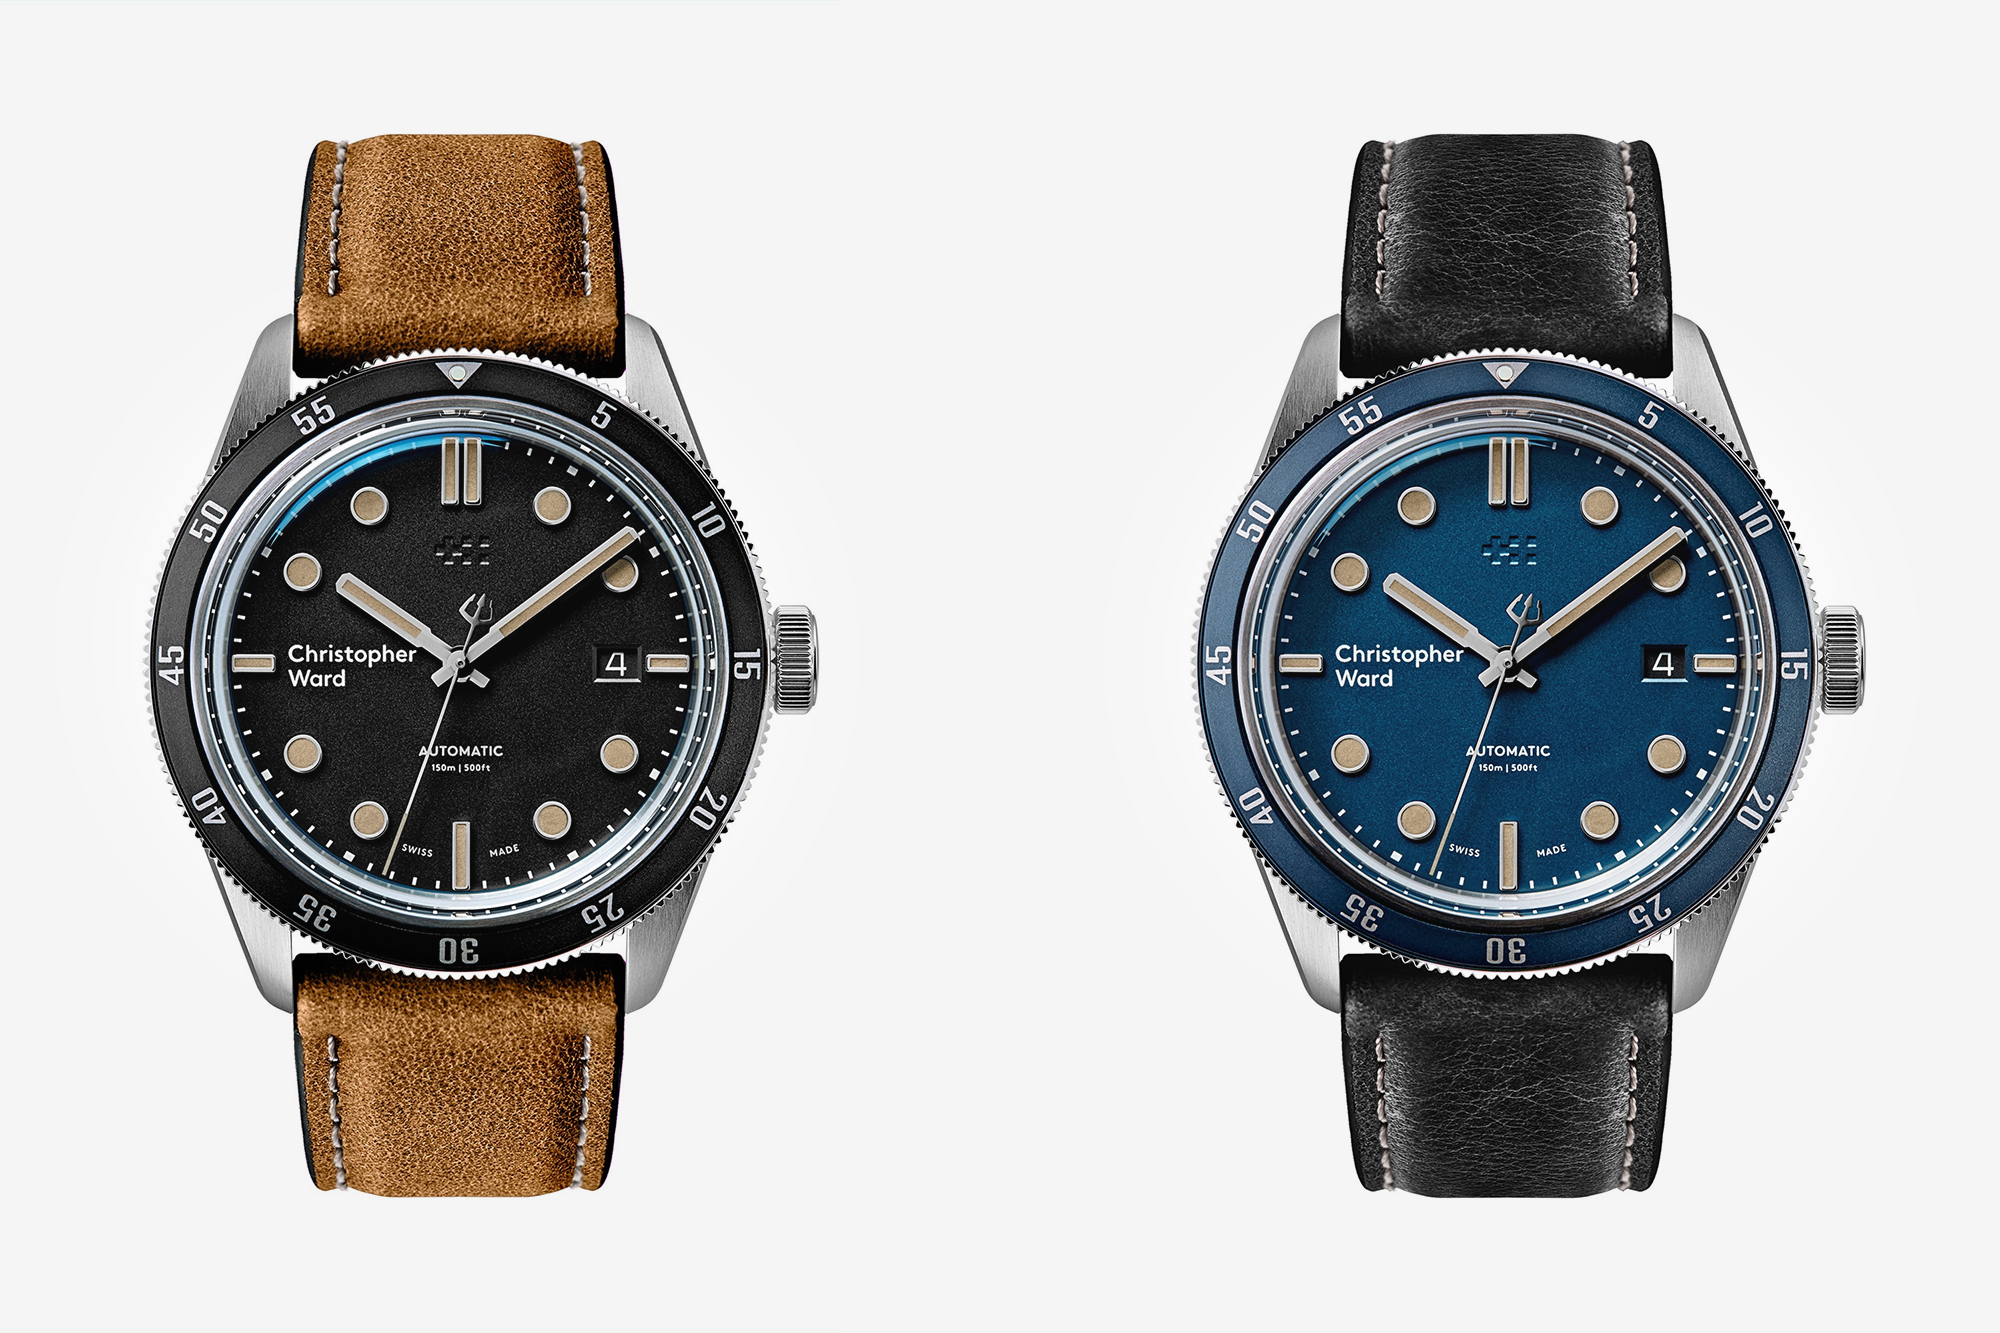 Introducing the Christopher Ward C65 Trident Automatic